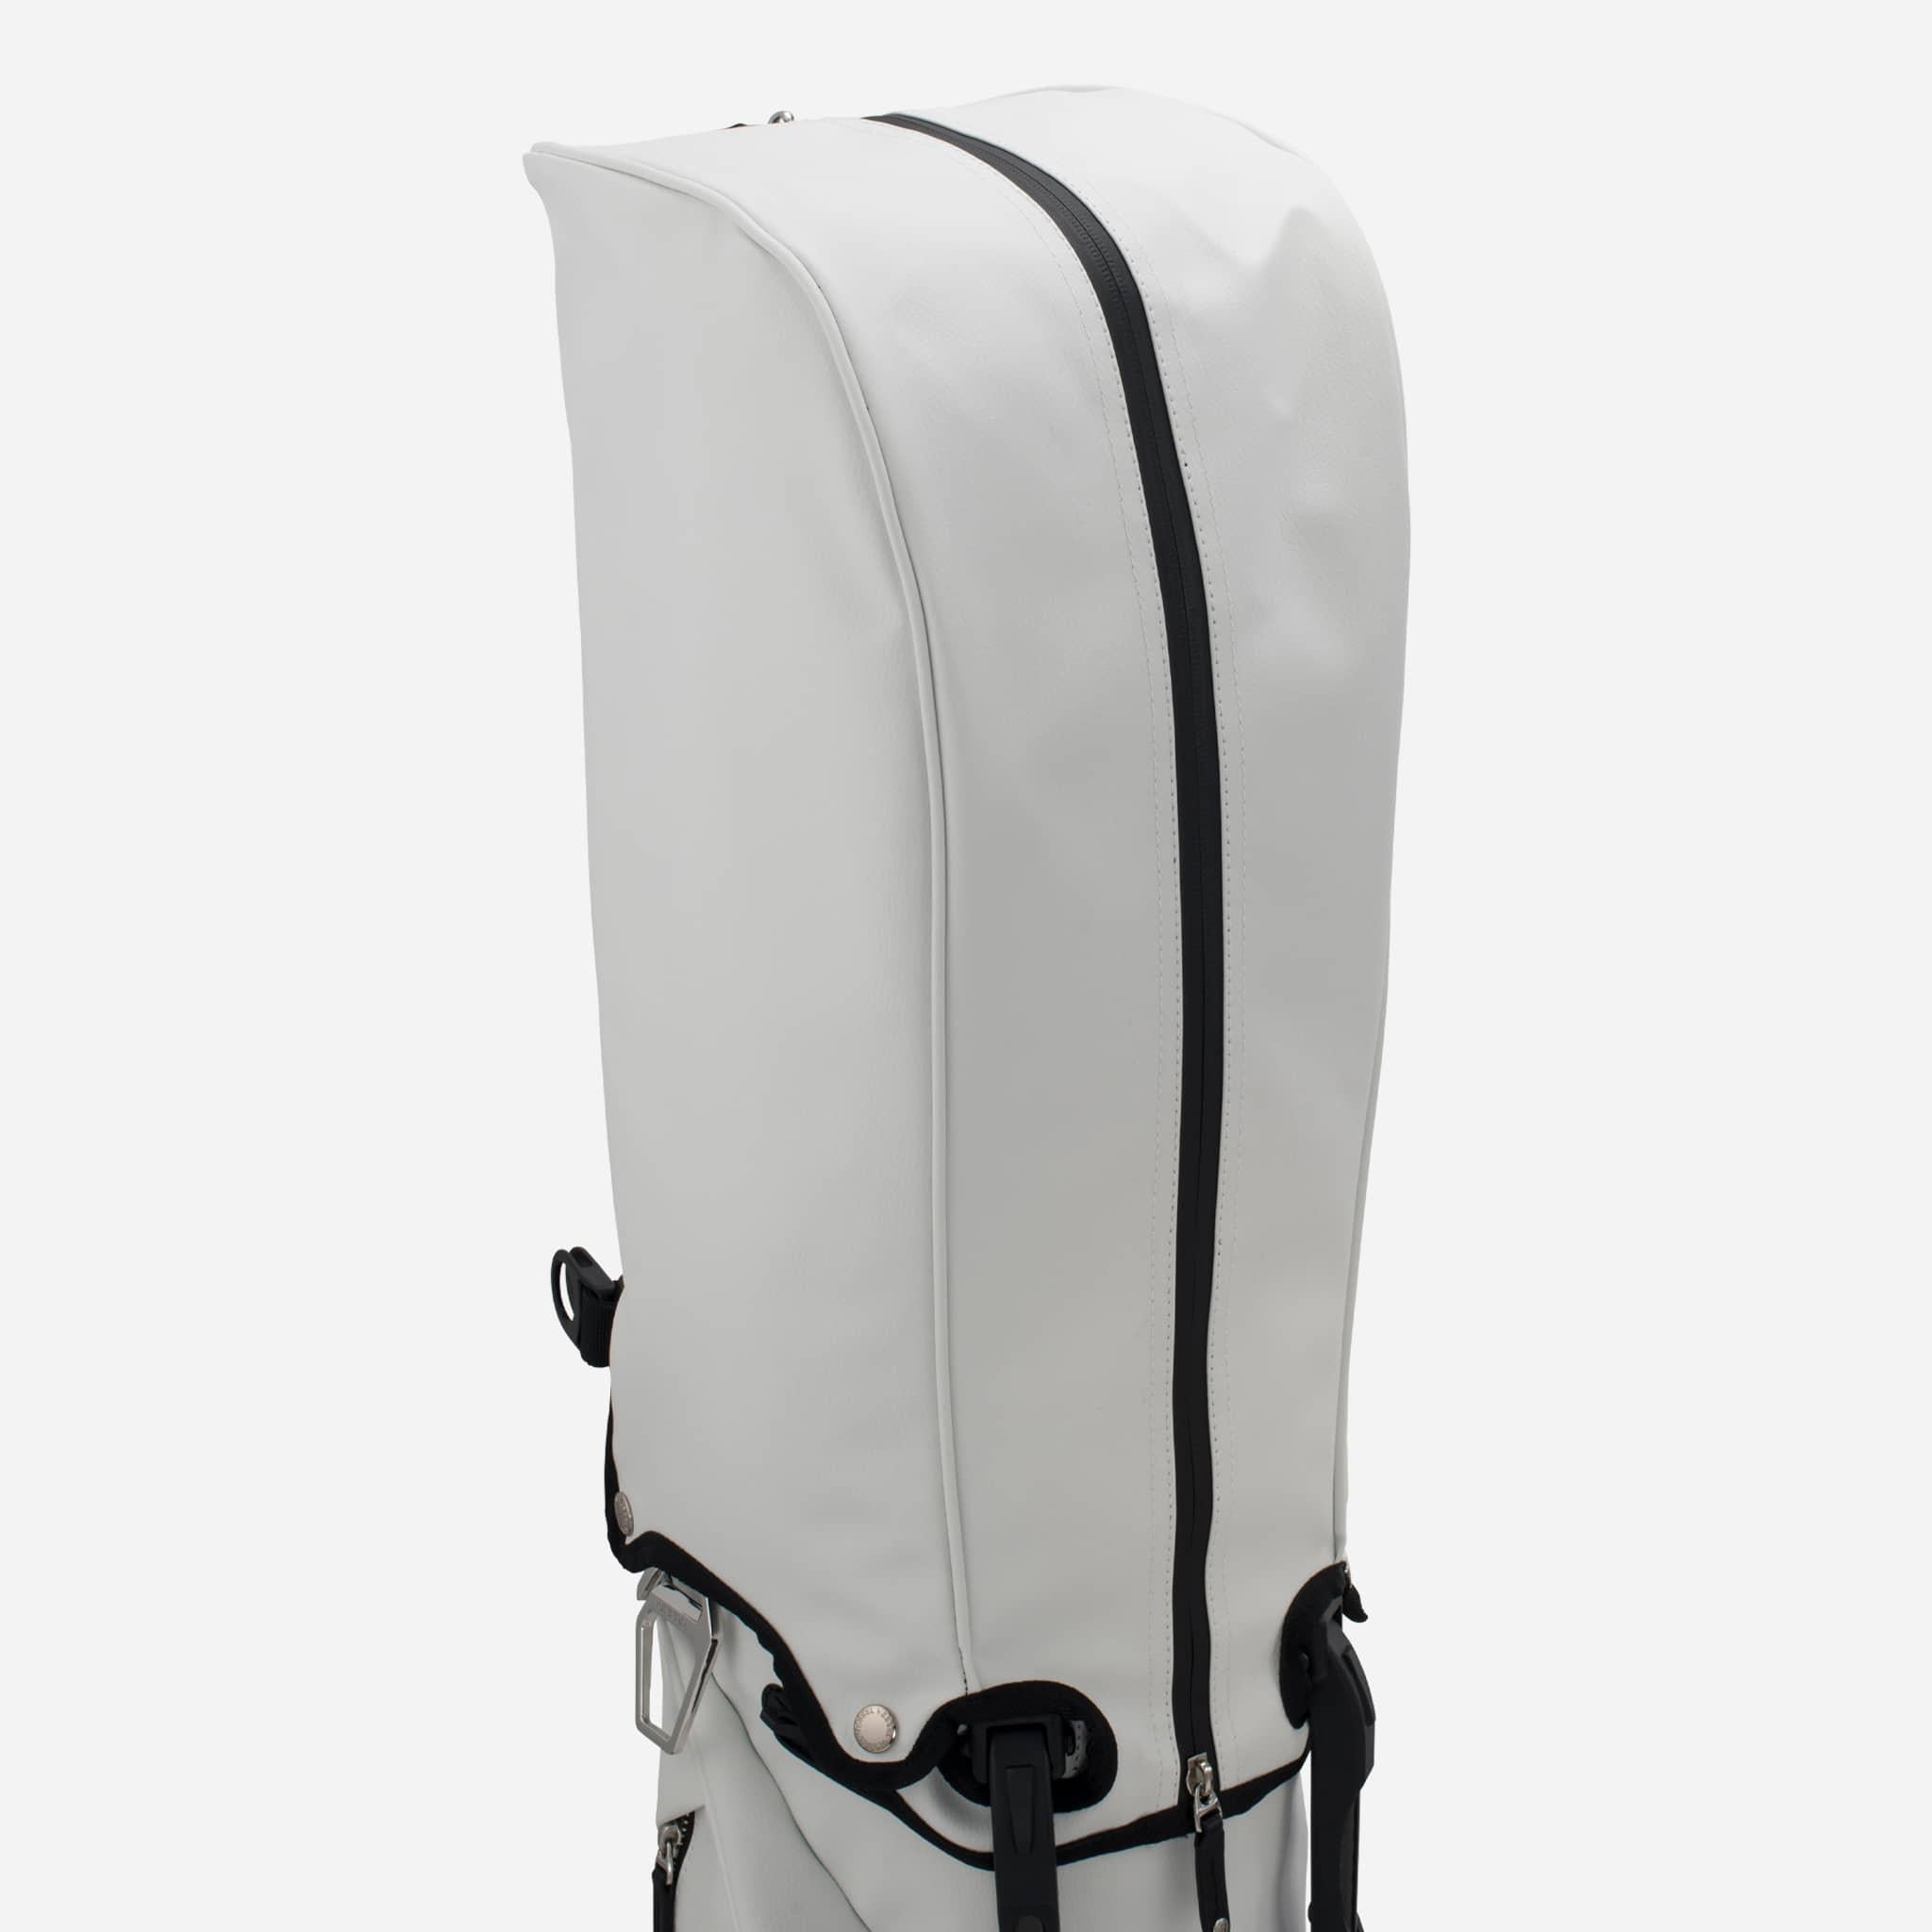 VLS Lux Stand Bag | Luxury Golf Bags Perforated Natural